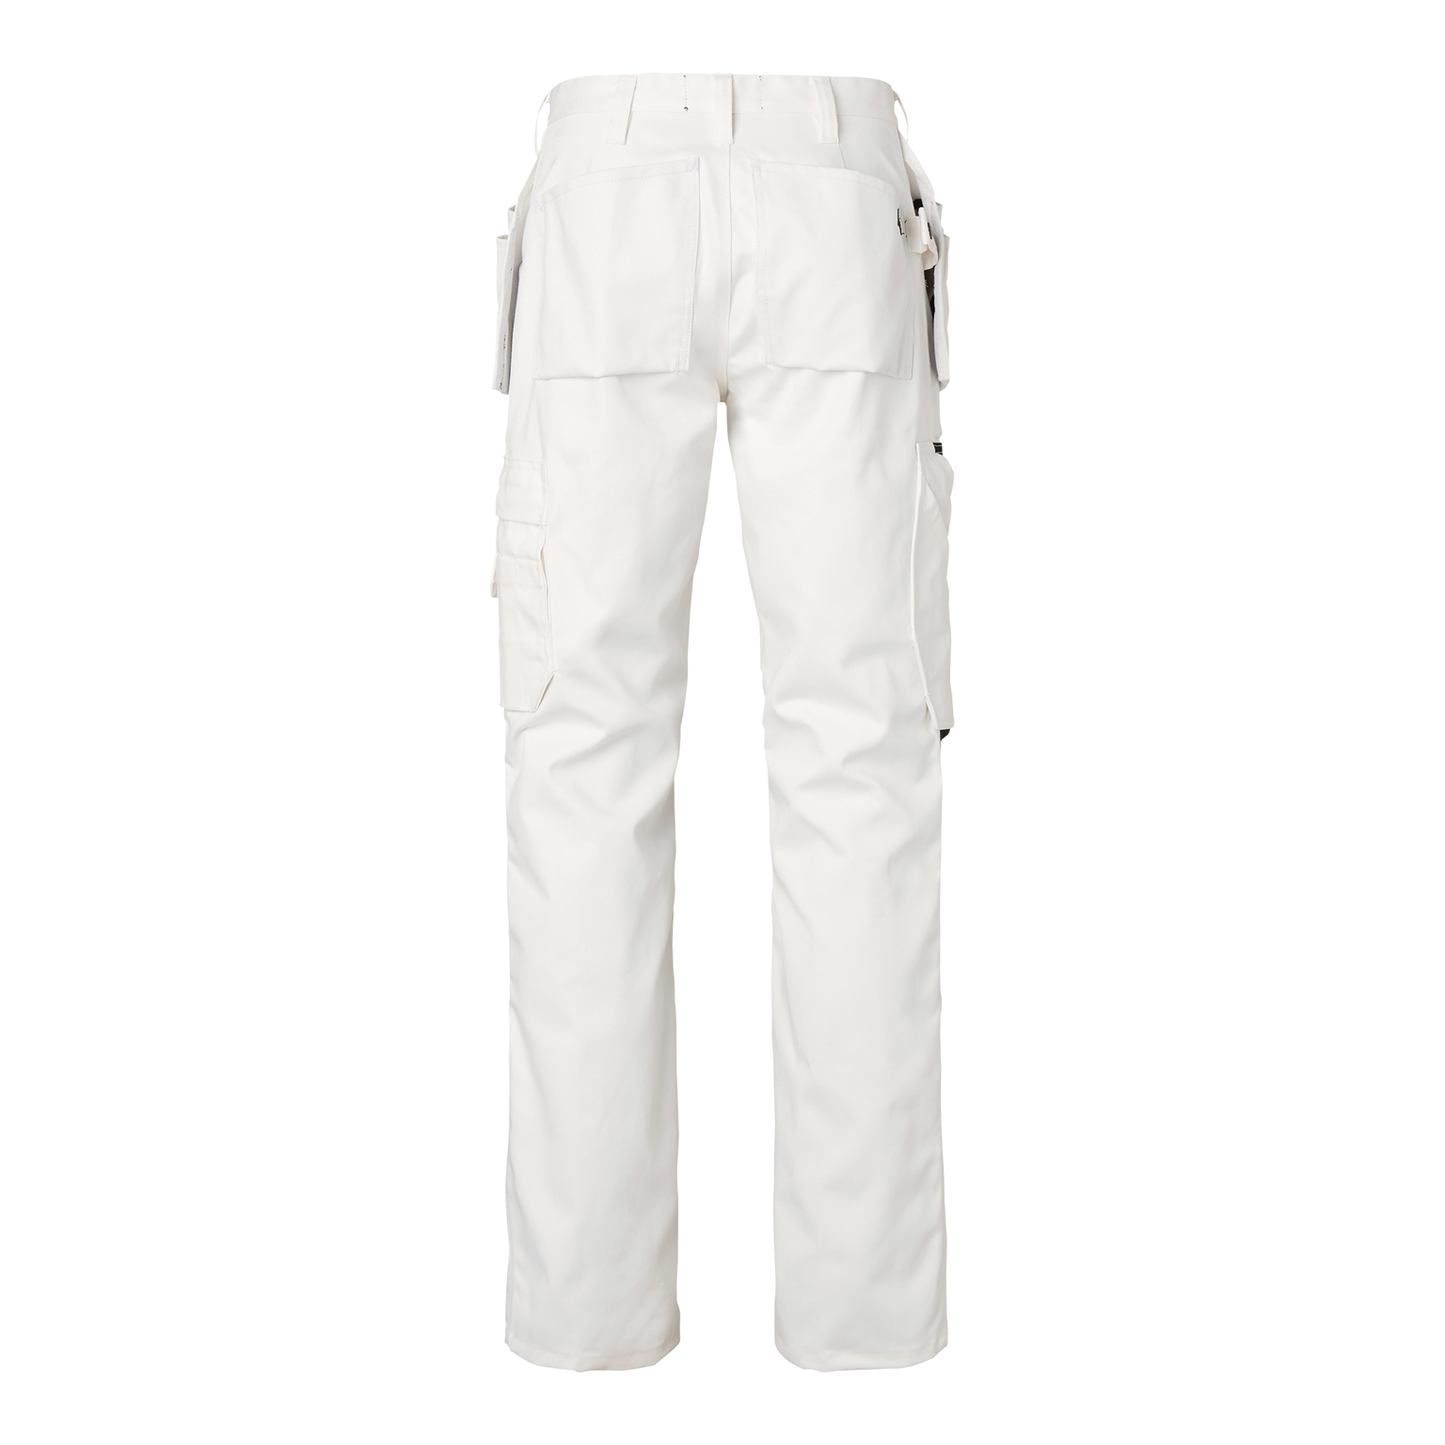 TOP SWEDE - PAINTER'S TROUSERS